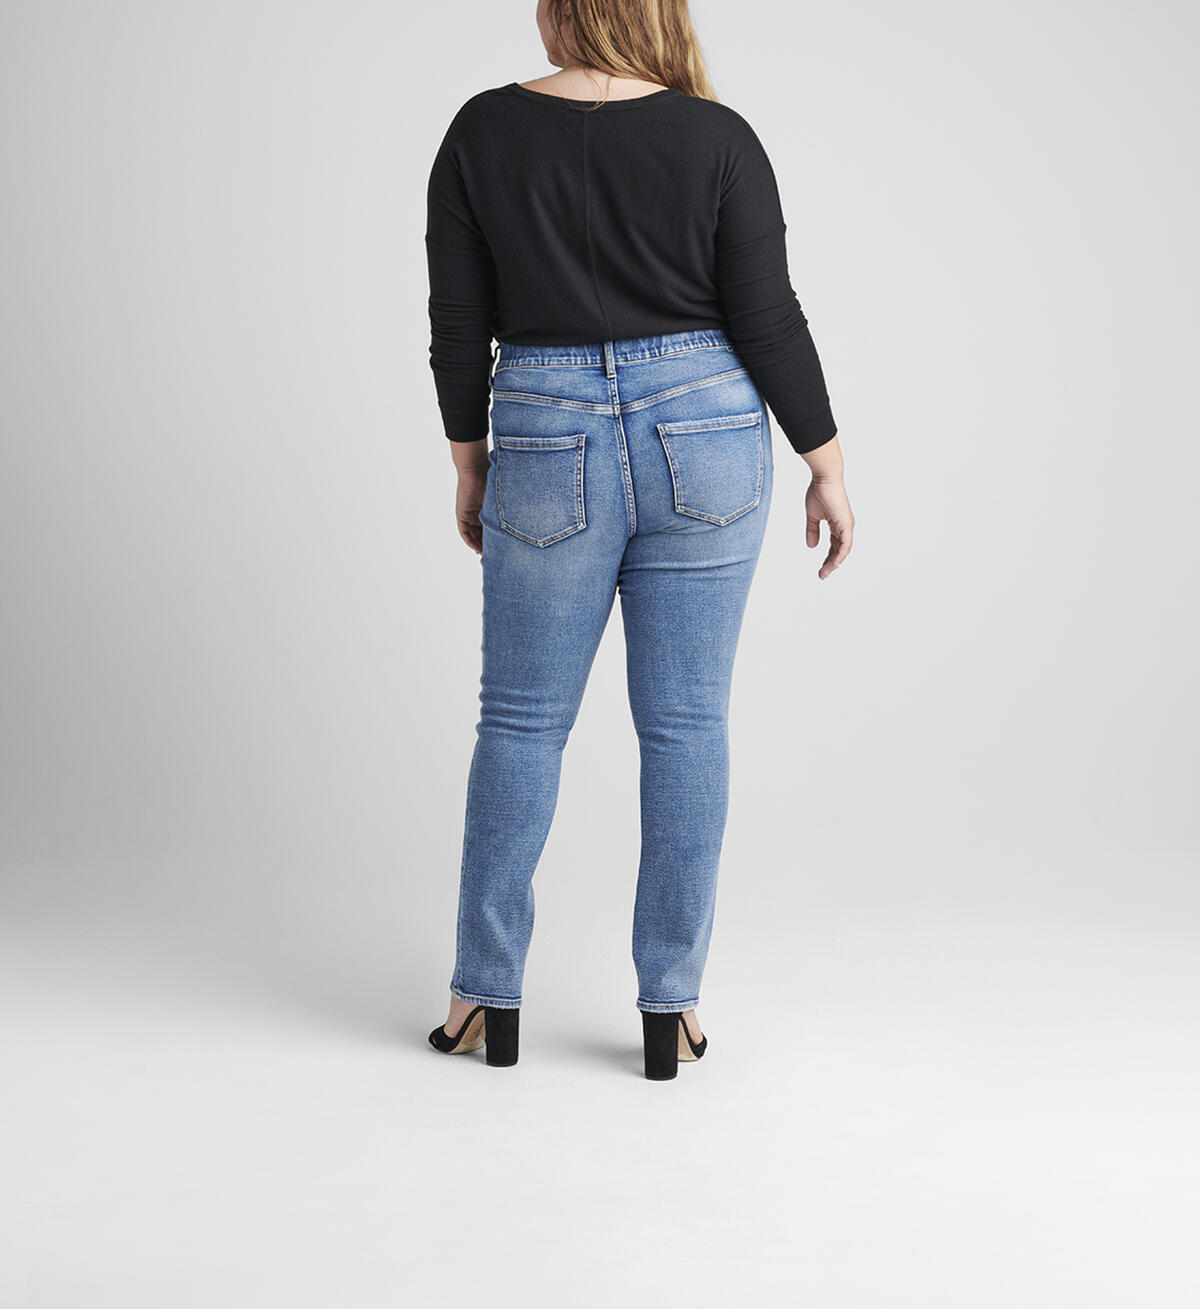 Valentina High Rise Straight Leg Pull-On Jeans Plus Size, , hi-res image number 1